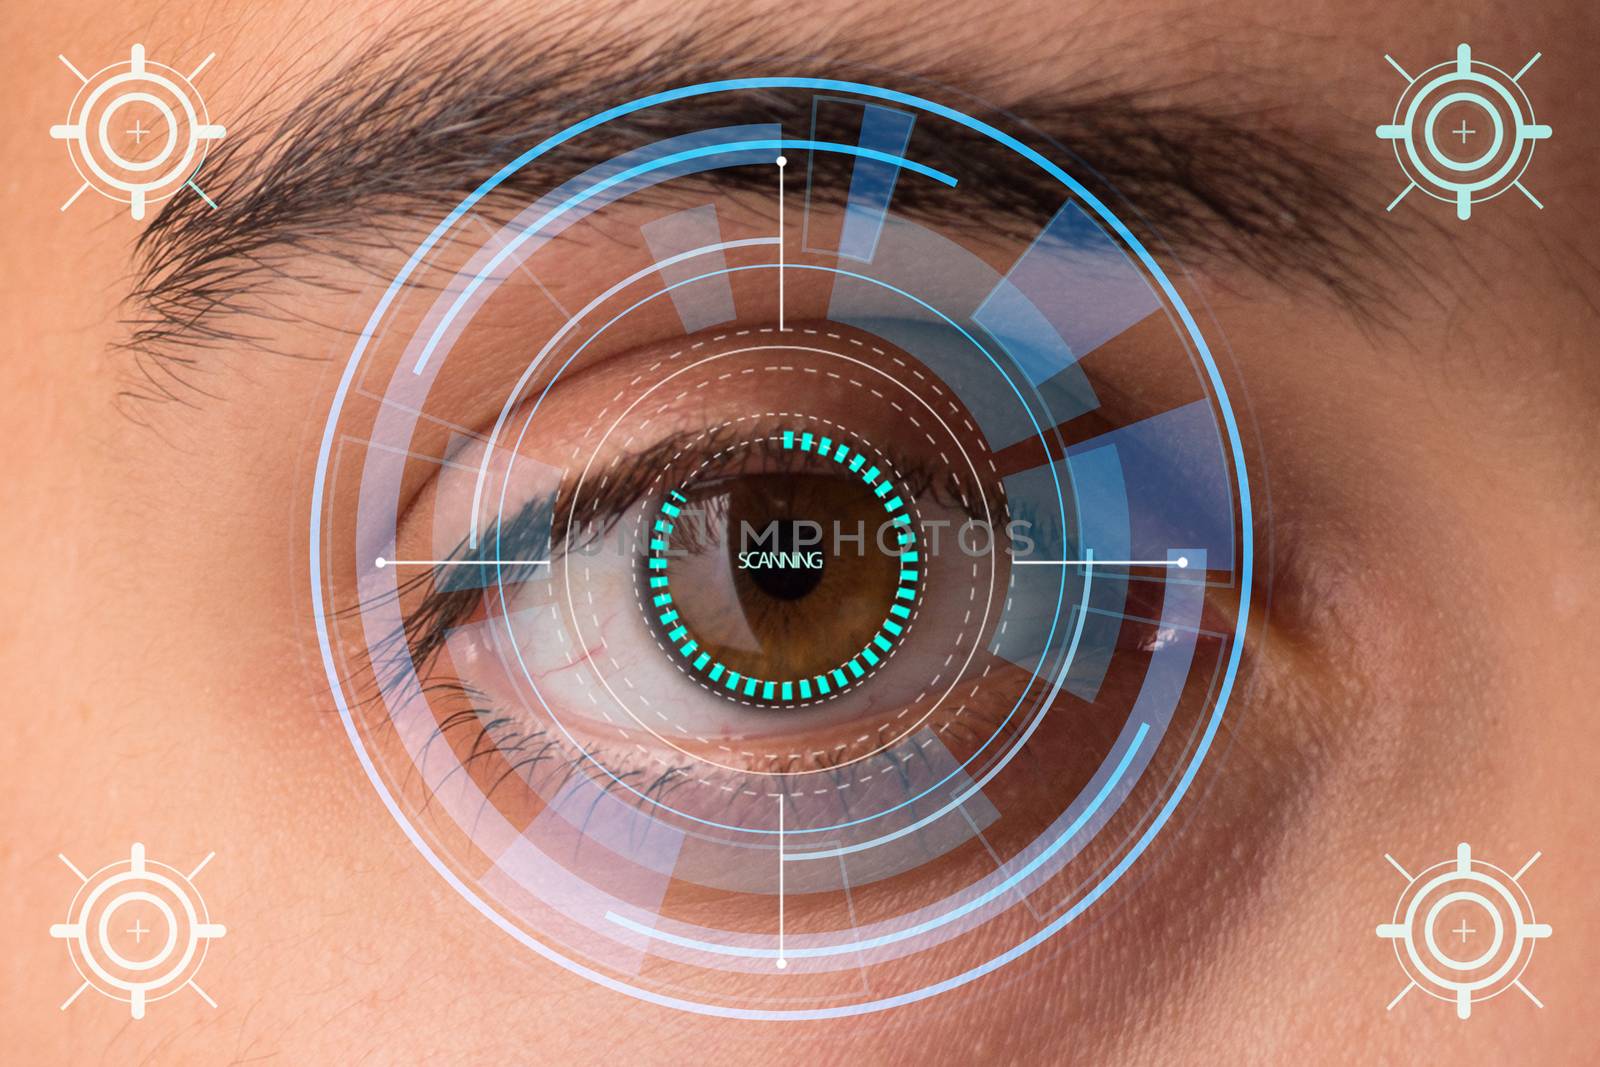 Concept of sensor implanted into human eye by Elnur